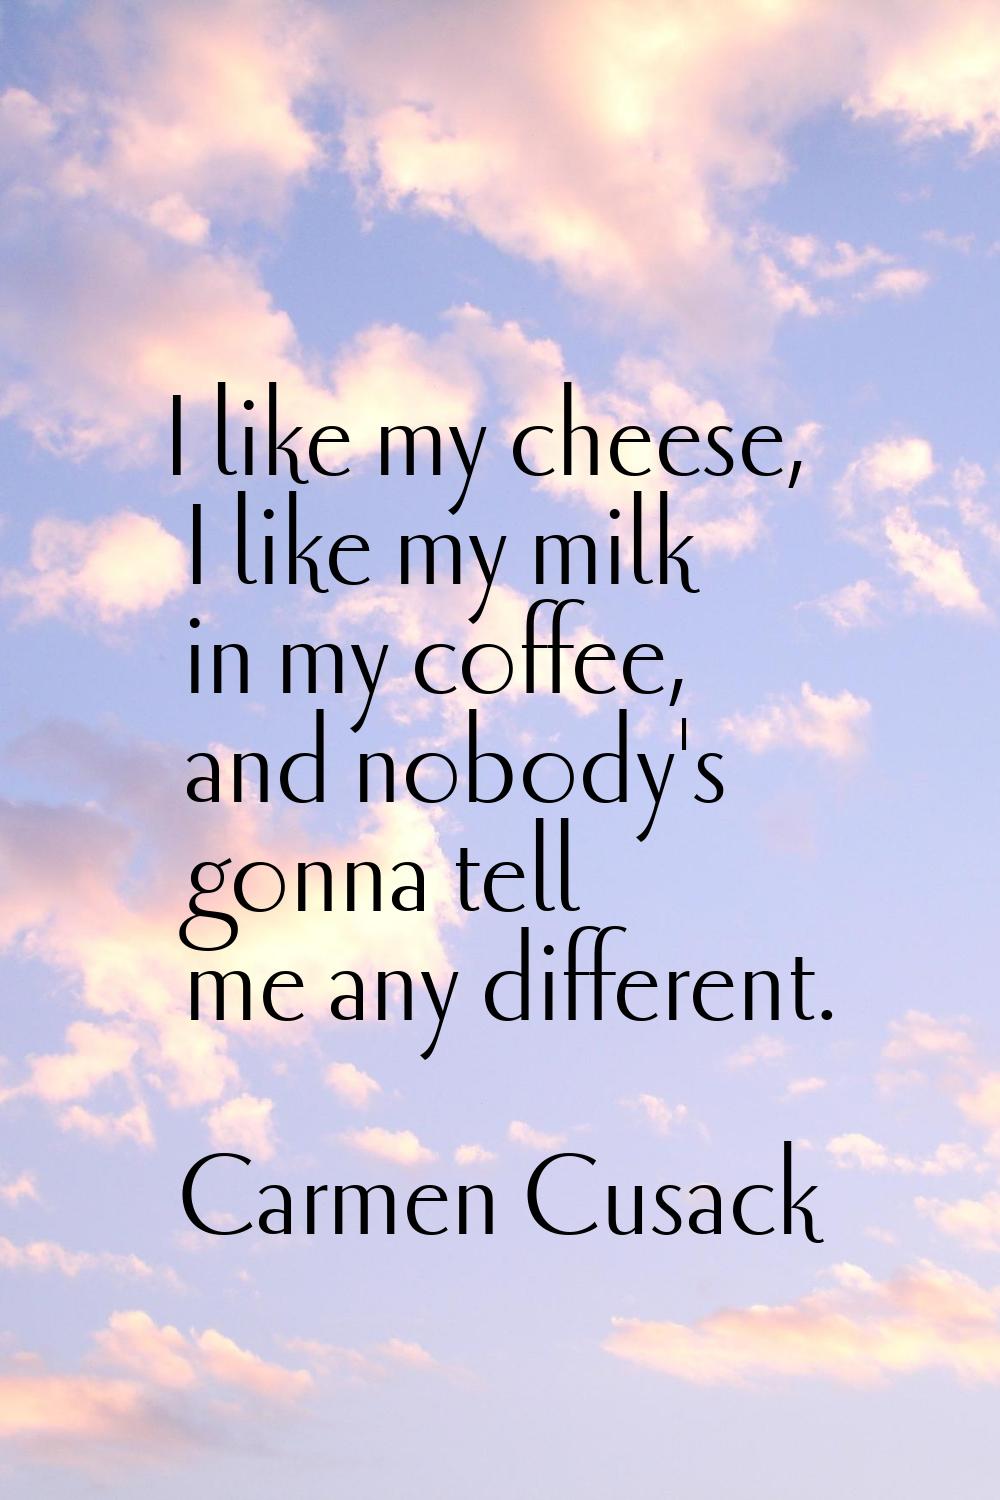 I like my cheese, I like my milk in my coffee, and nobody's gonna tell me any different.